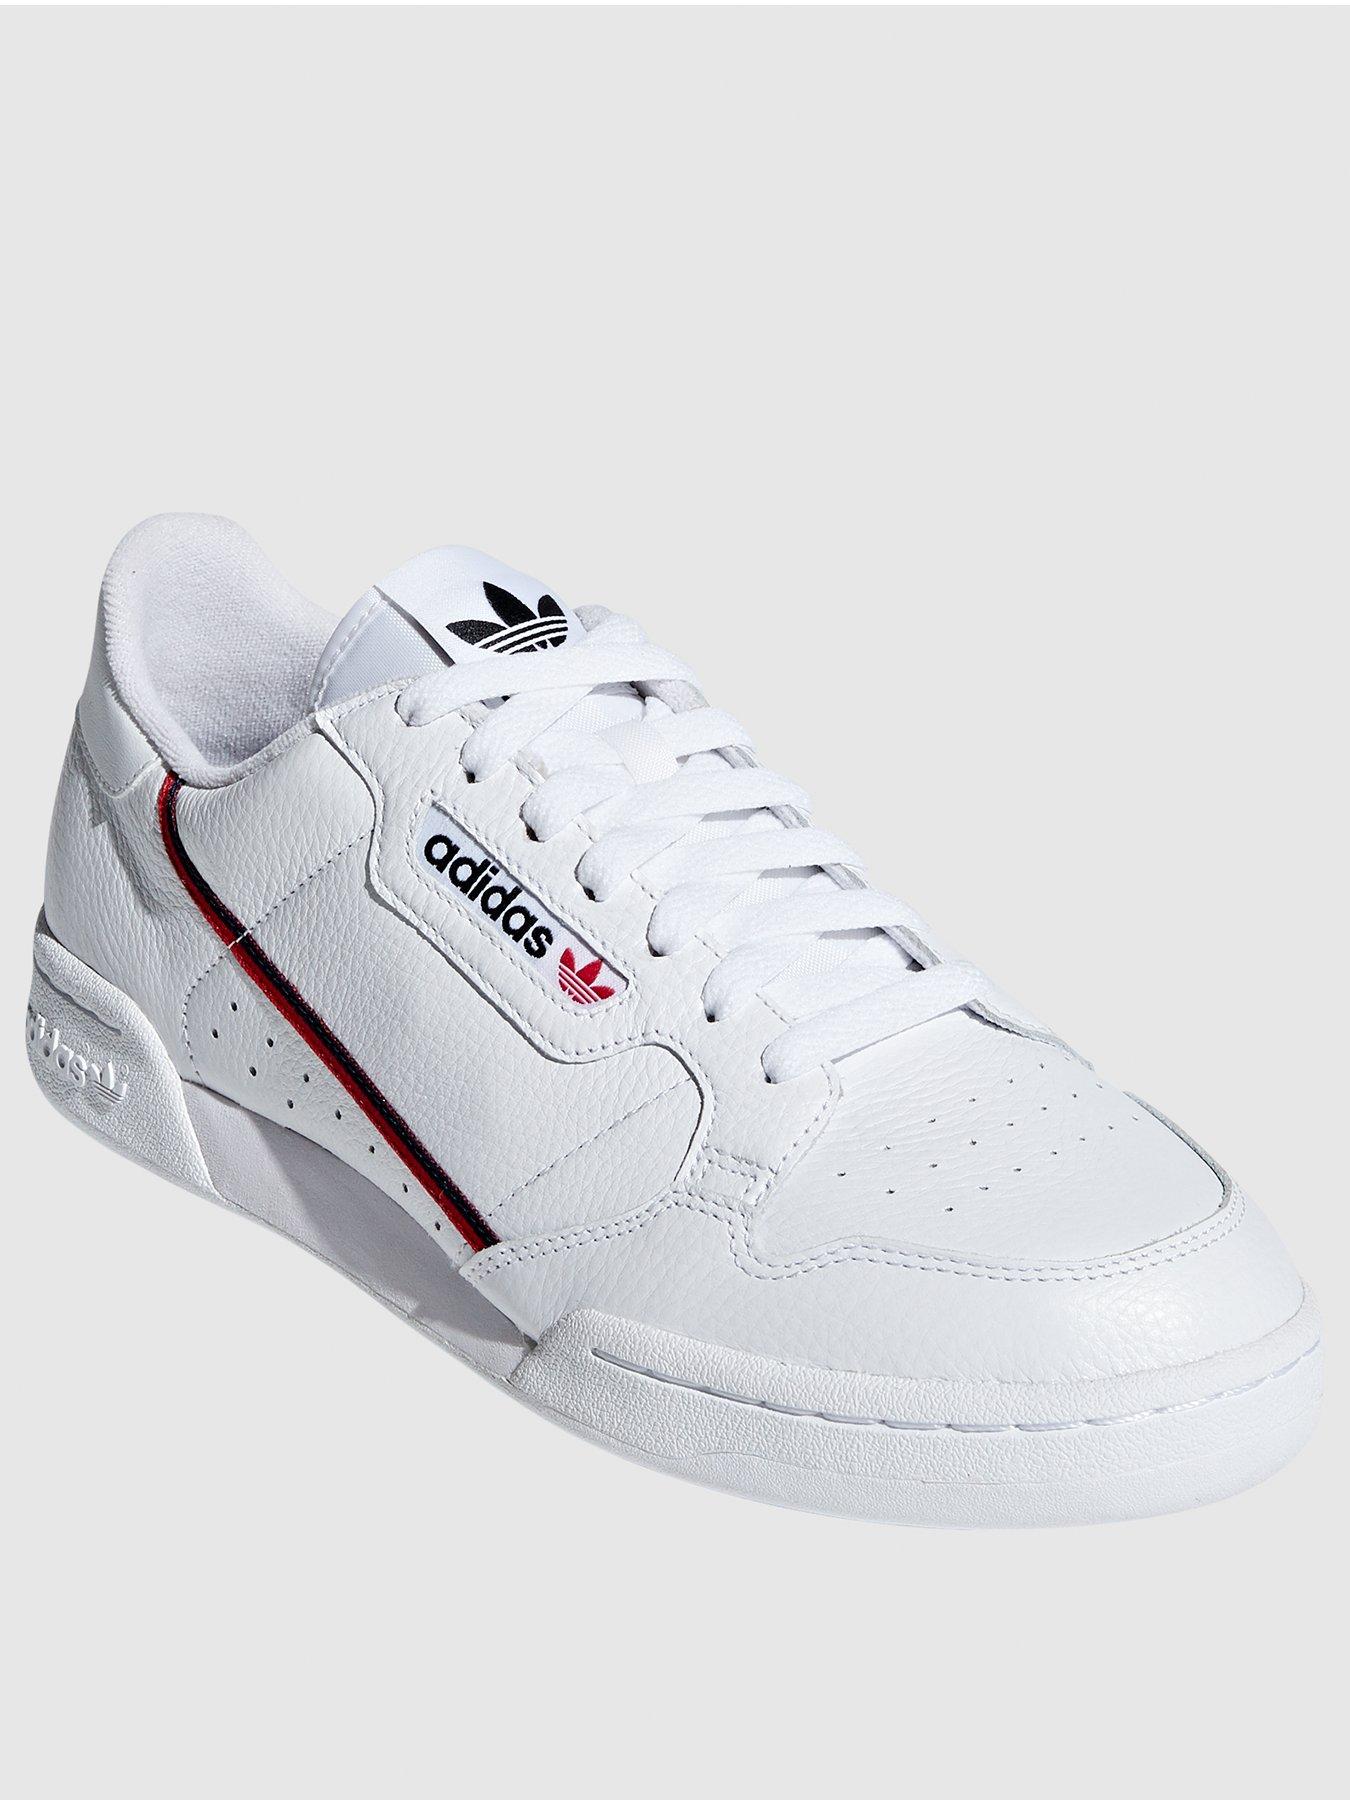 adidas white and red continental 80